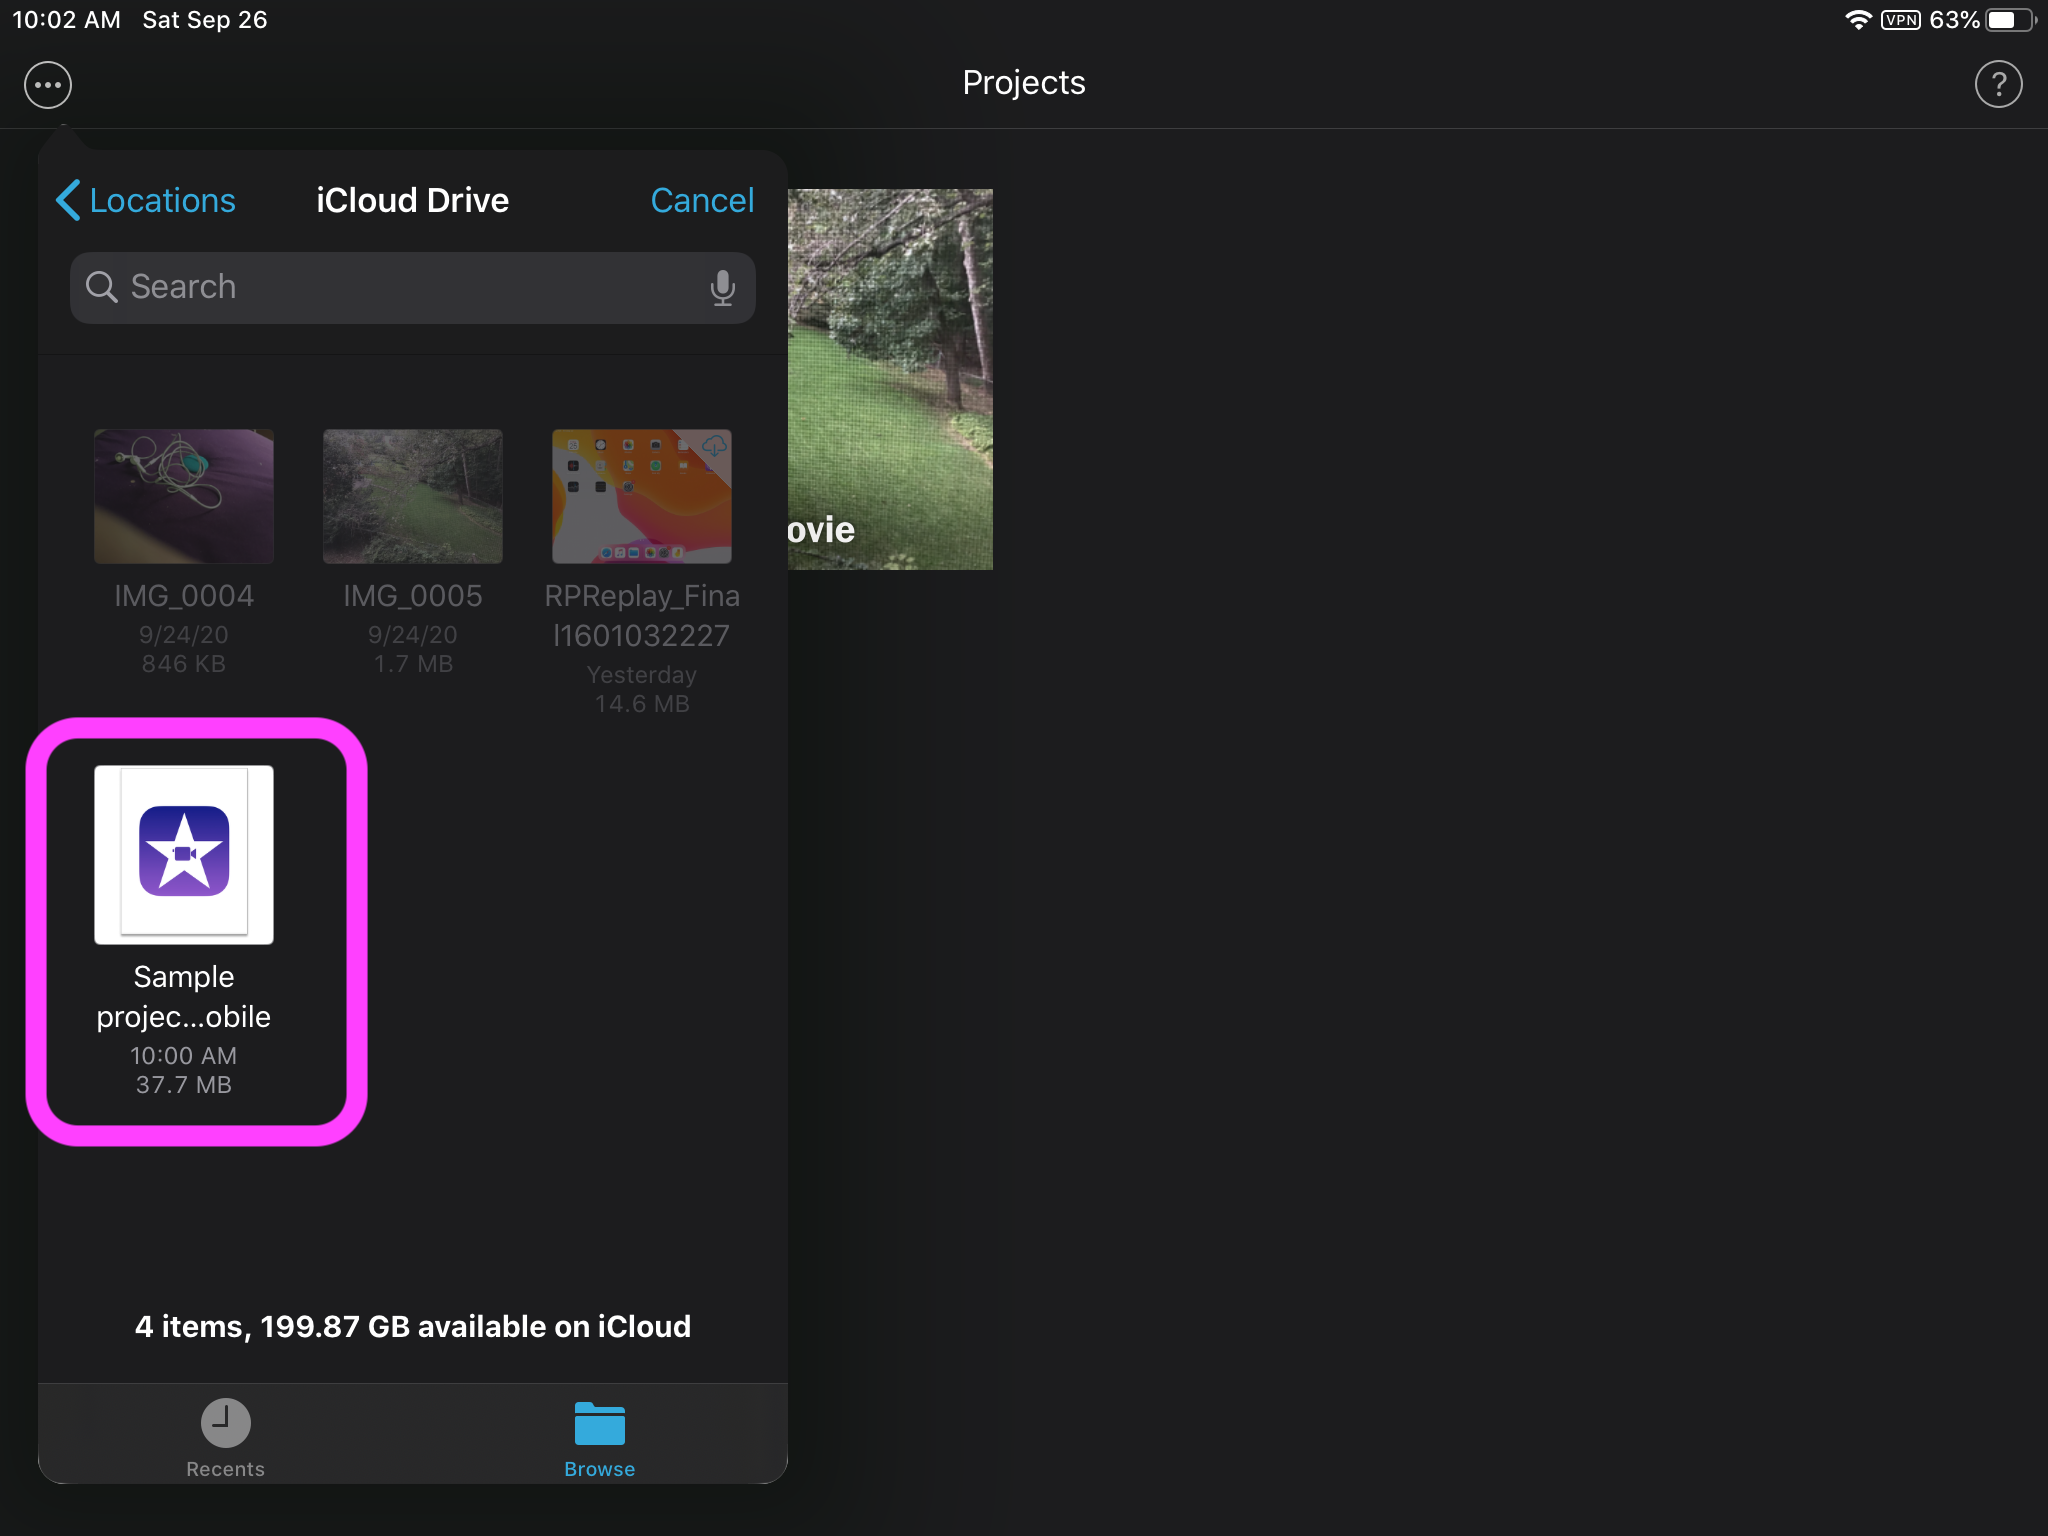 how to get pictures from icloud folder to imovie